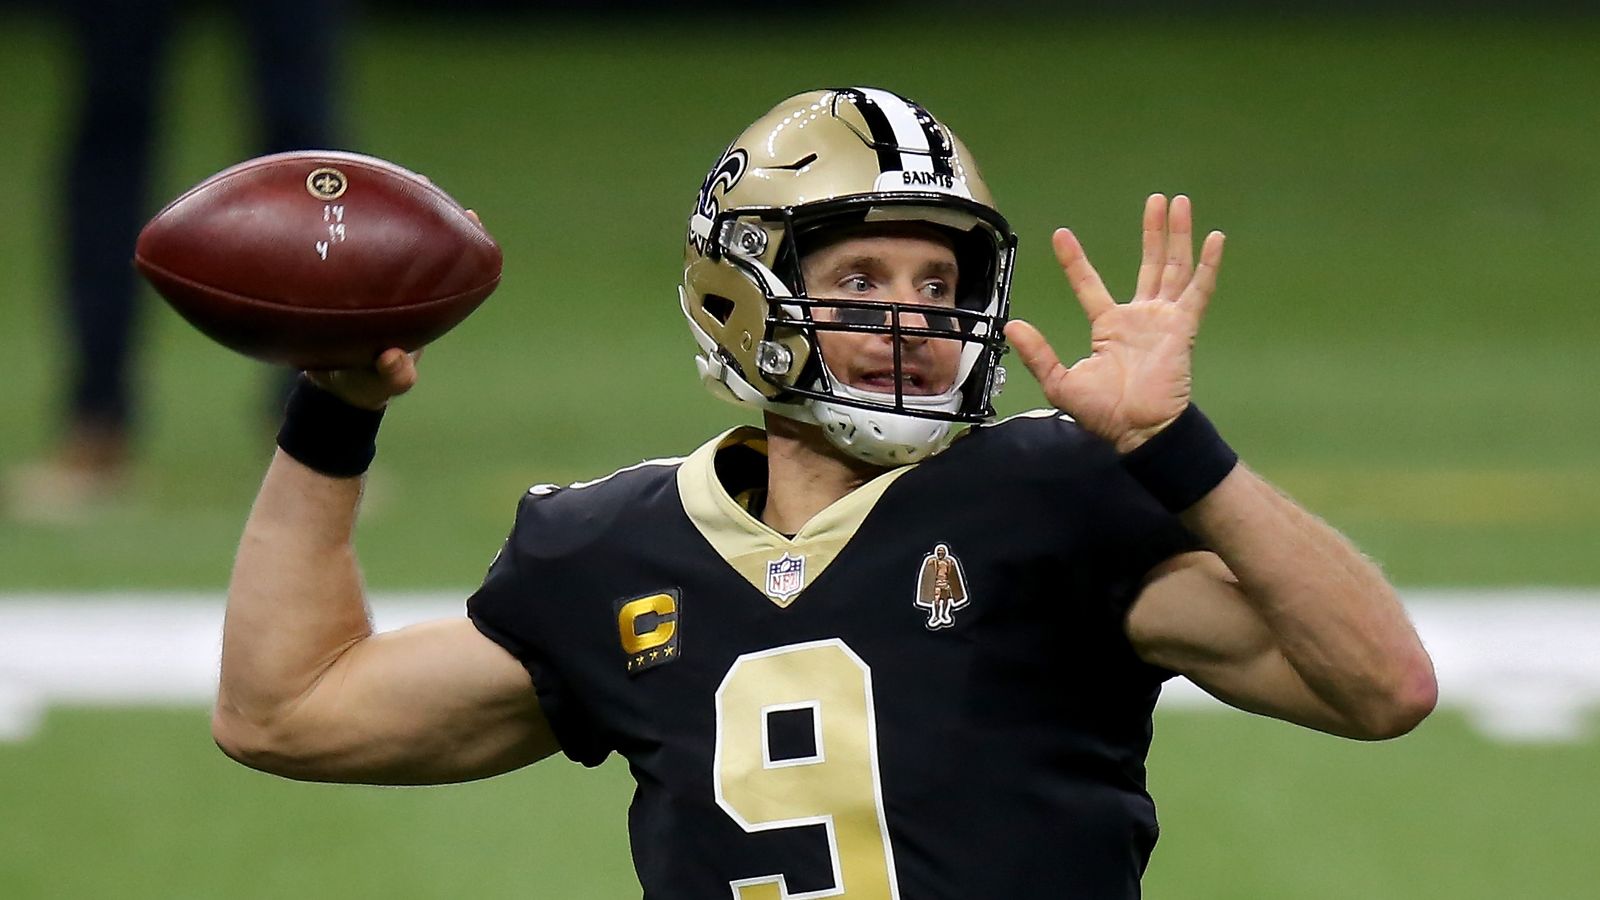 Drew Brees: New Orleans Saints quarterback back in practice after rib and lung injuries |  NFL News